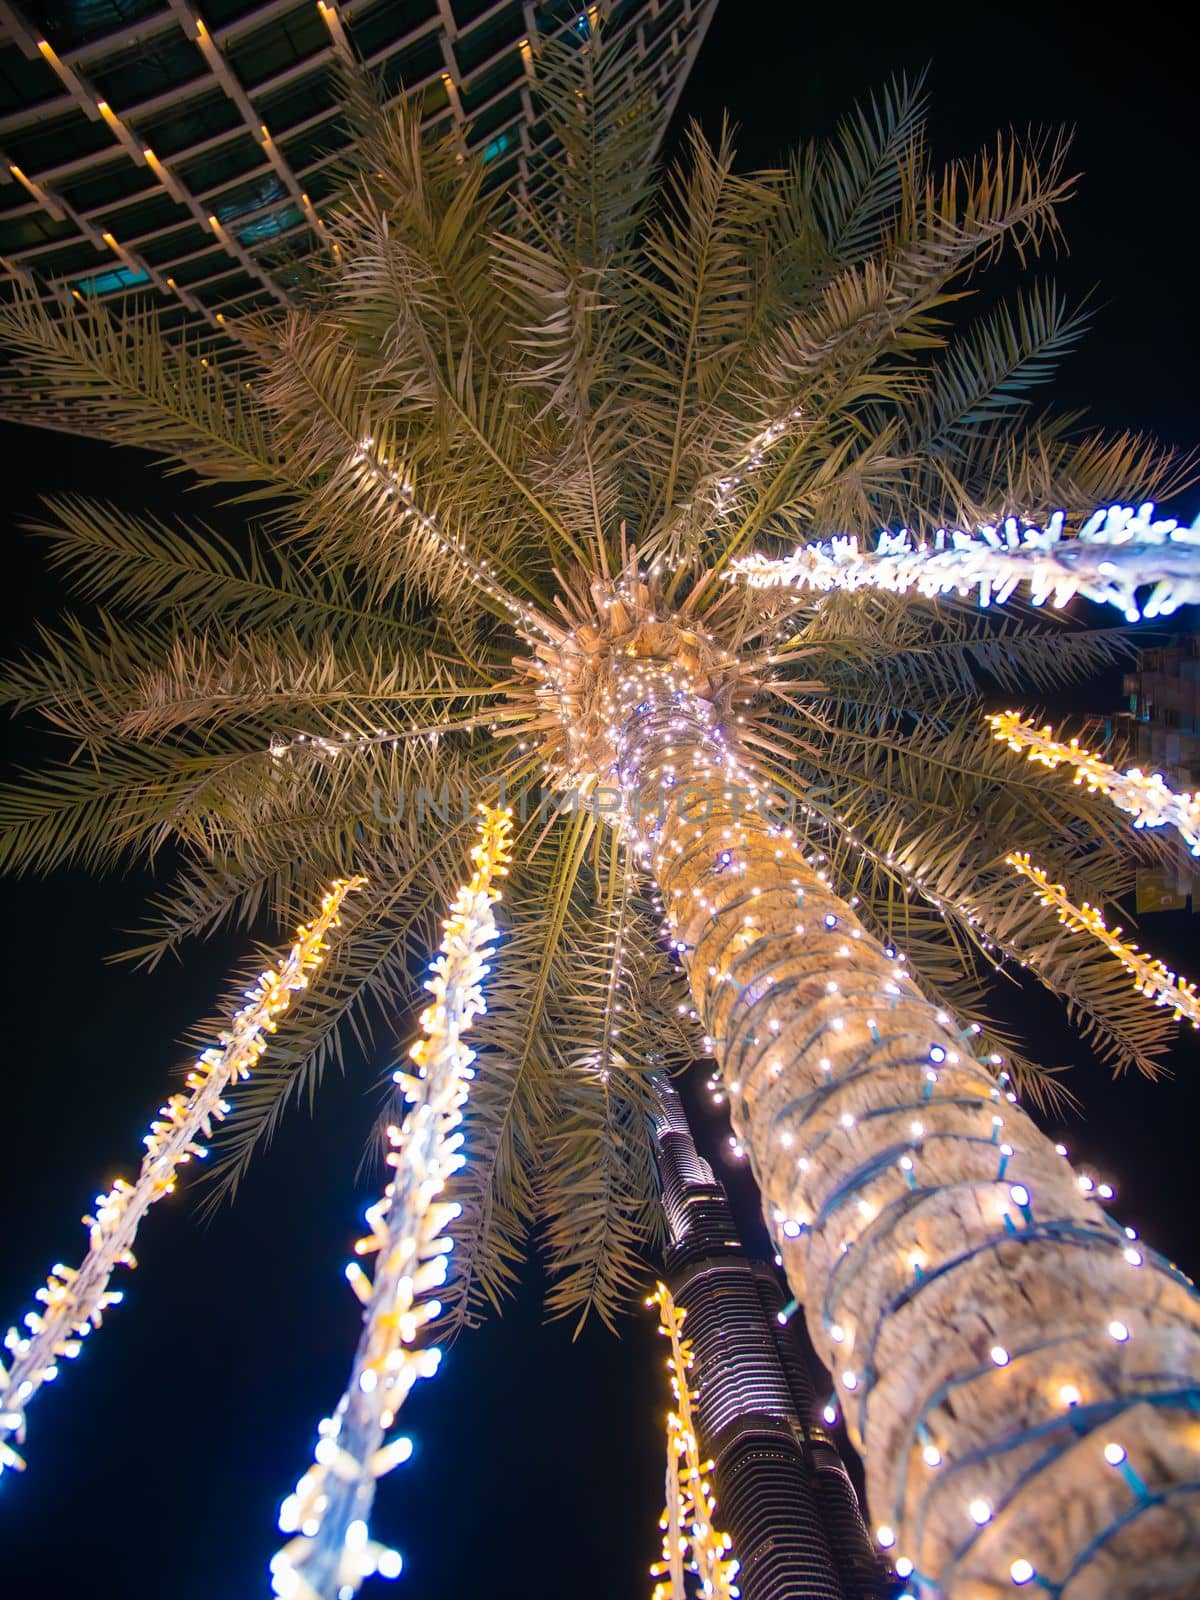 Palm trees with luminous garlands at night in Dubai.